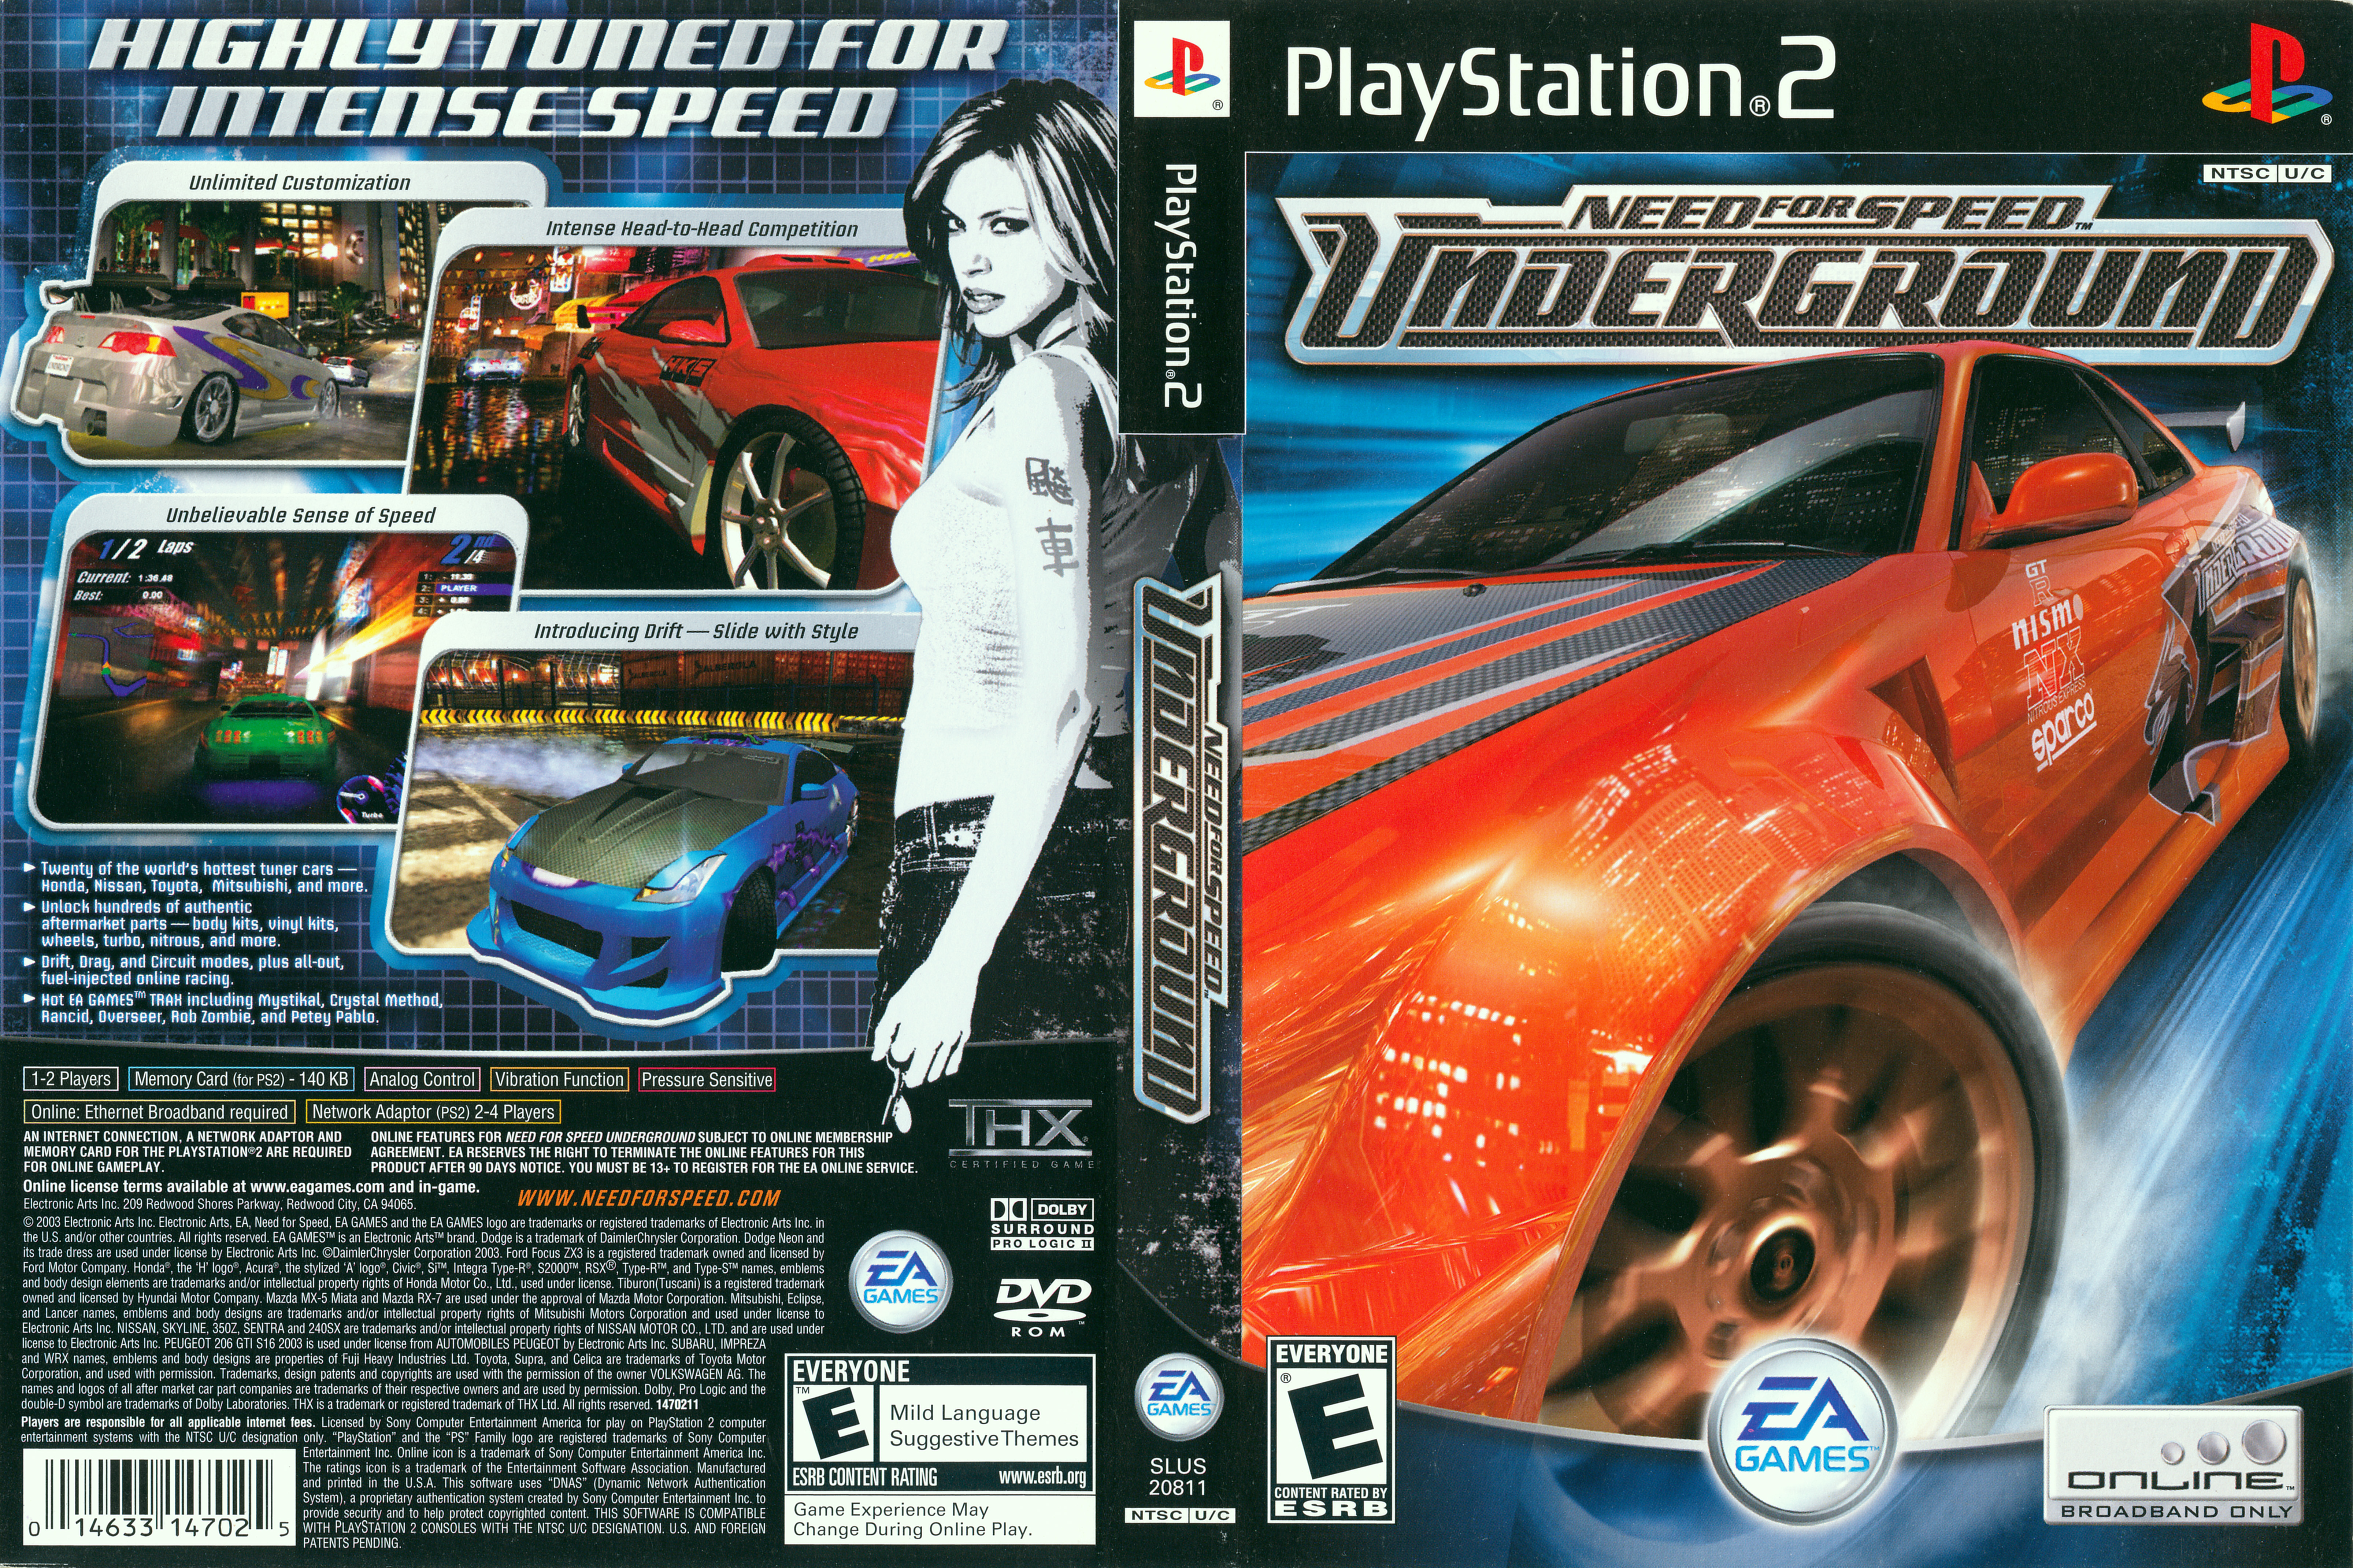 Песни из игры need for speed. Ps2 диск need for Speed. Sony PLAYSTATION 2 need for Speed. Need for Speed Underground на ПС ПС 4. NFS ps2.